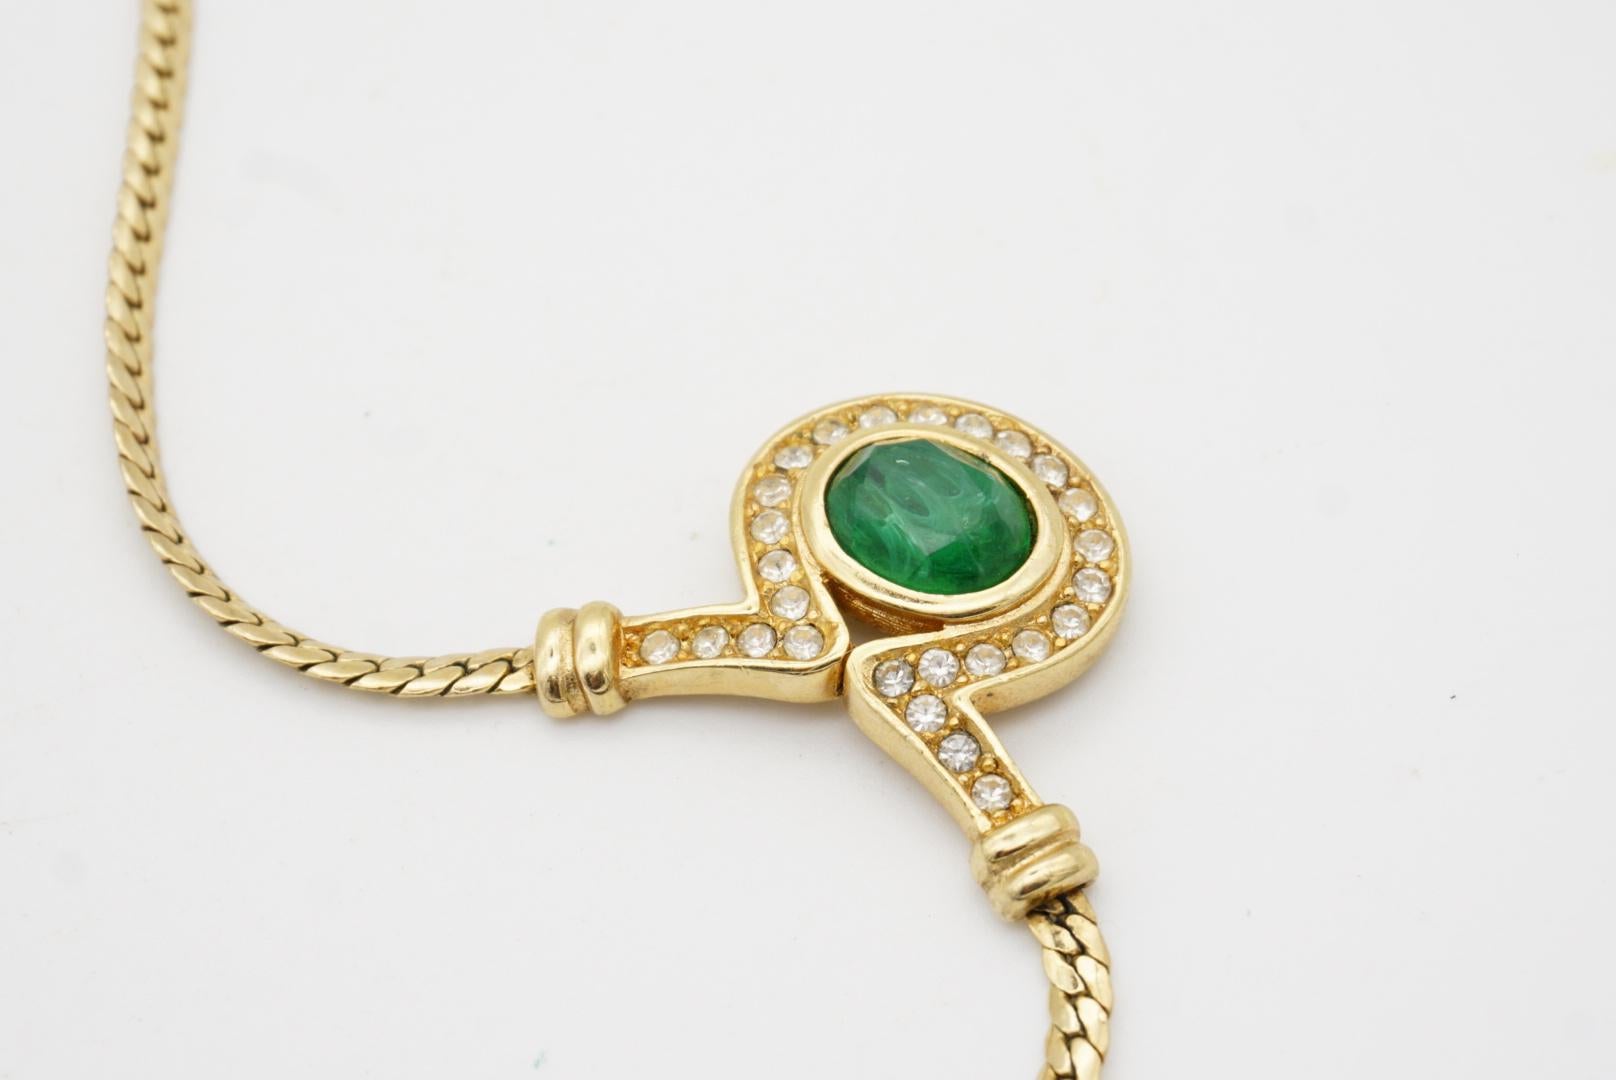 Christian Dior Vintage 1980s Emerald Green Gripoix Oval Pendant Crystal Necklace For Sale 6